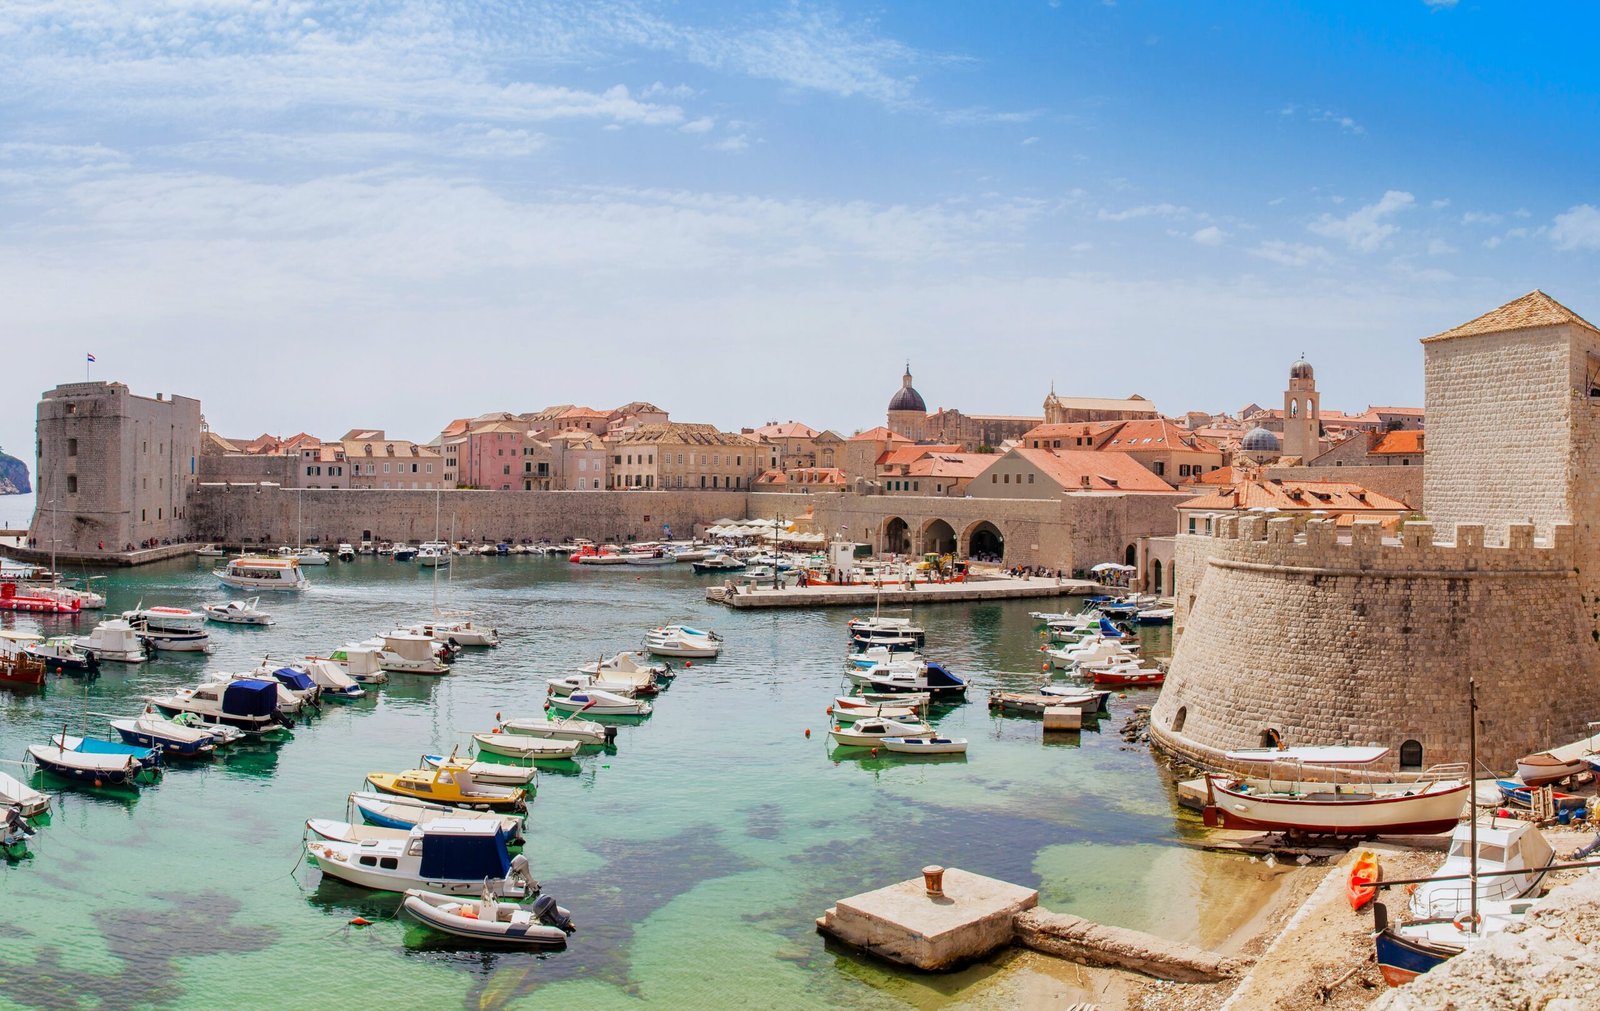 Mediterranean panorama of the beautiful Dubrovnik old city including the old port, city walls and fortifications.